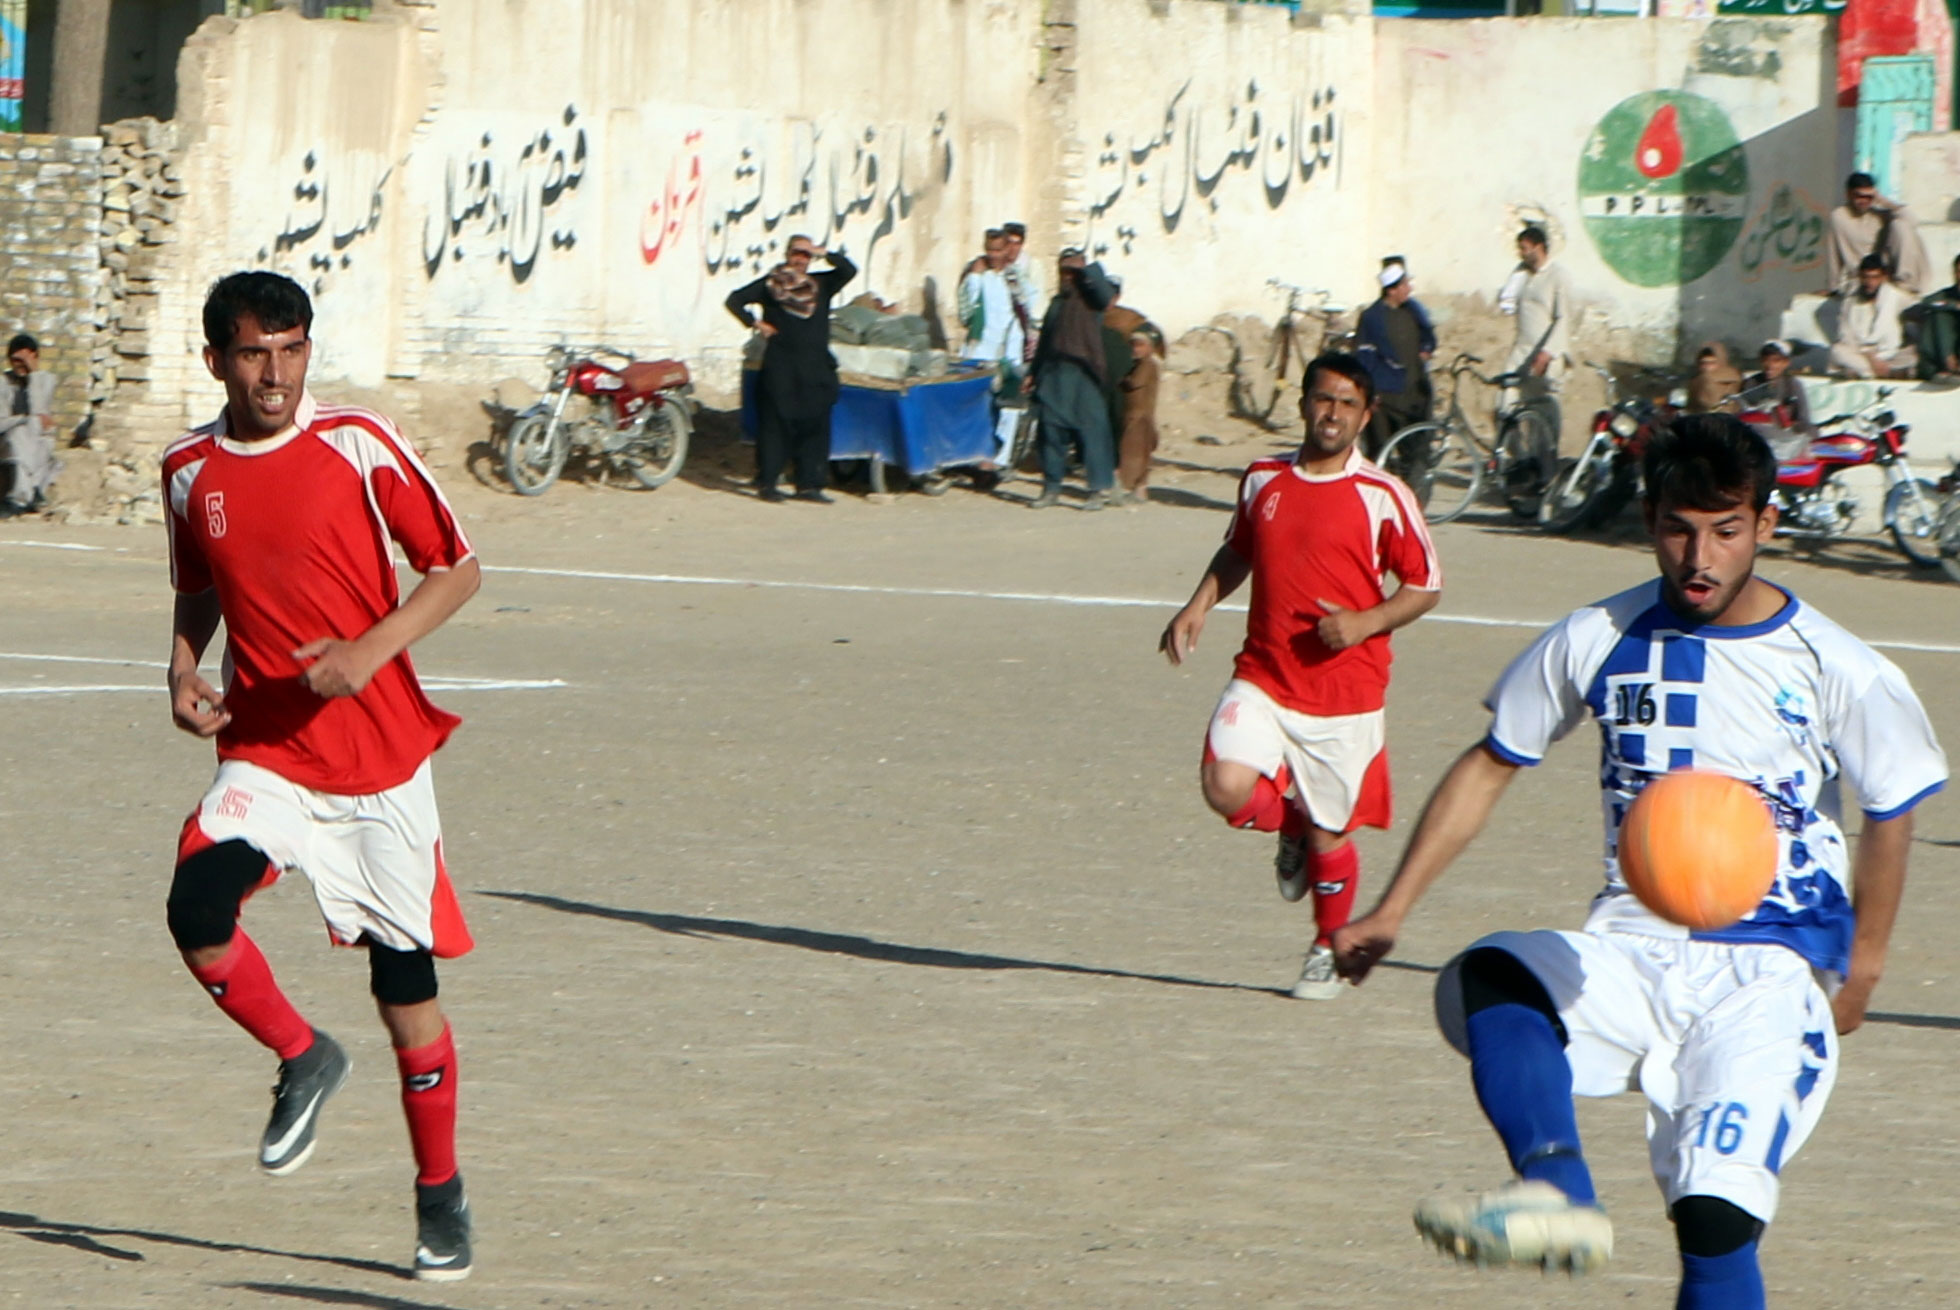 Ufone Balochistan Football Cup: Quetta all set to host the Quarterfinals from today